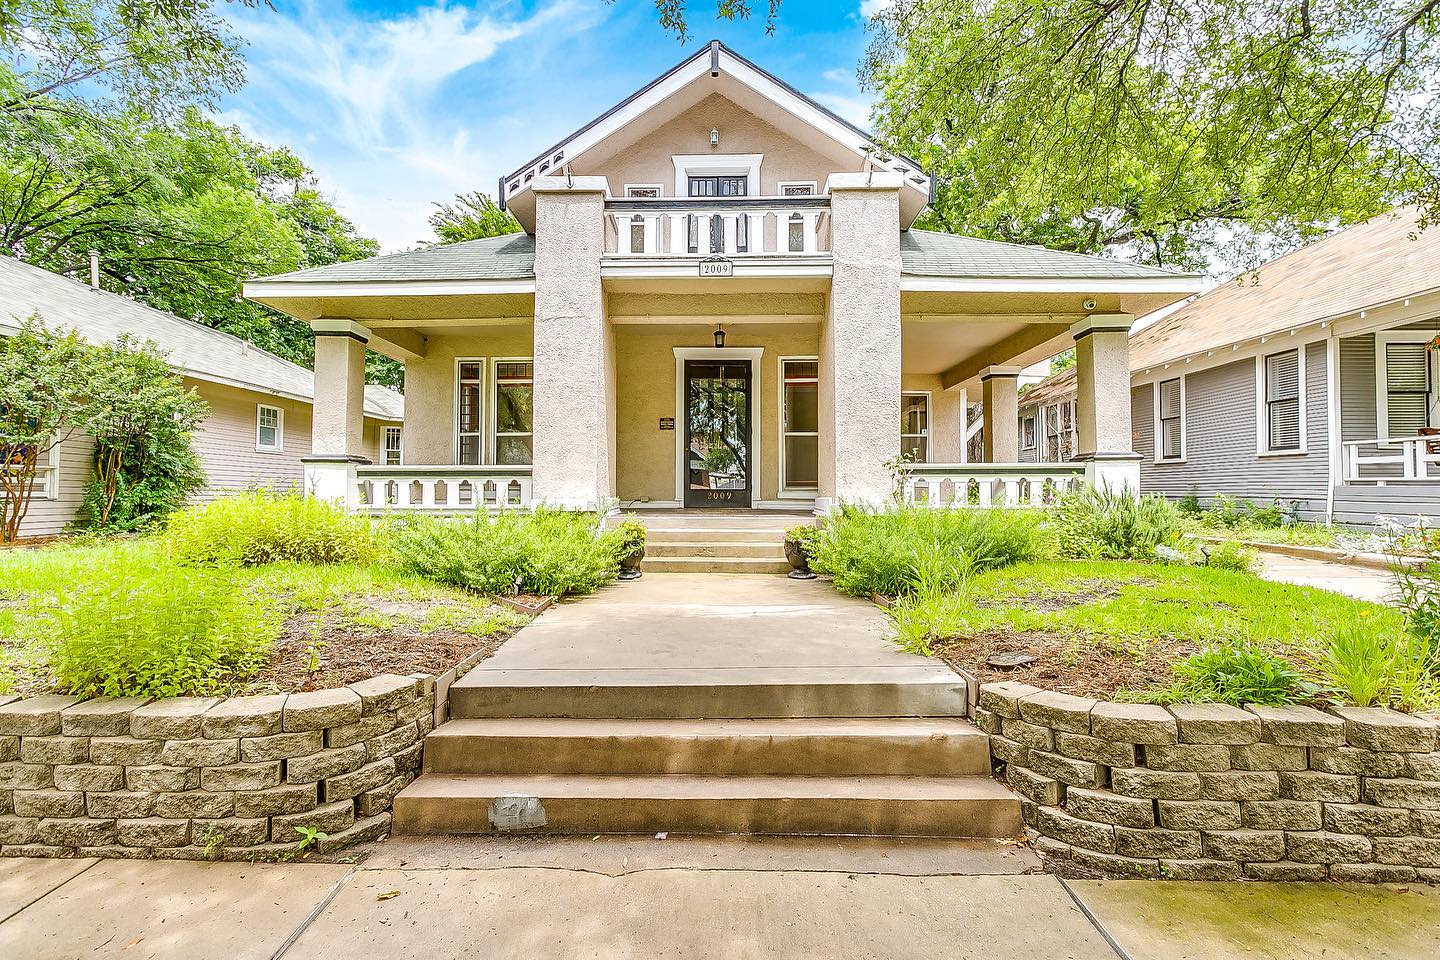 Pictured is a Prairie-style stucco home in Fairmount, Fort Worth. Photo by Instagram username @carleyjrealtor